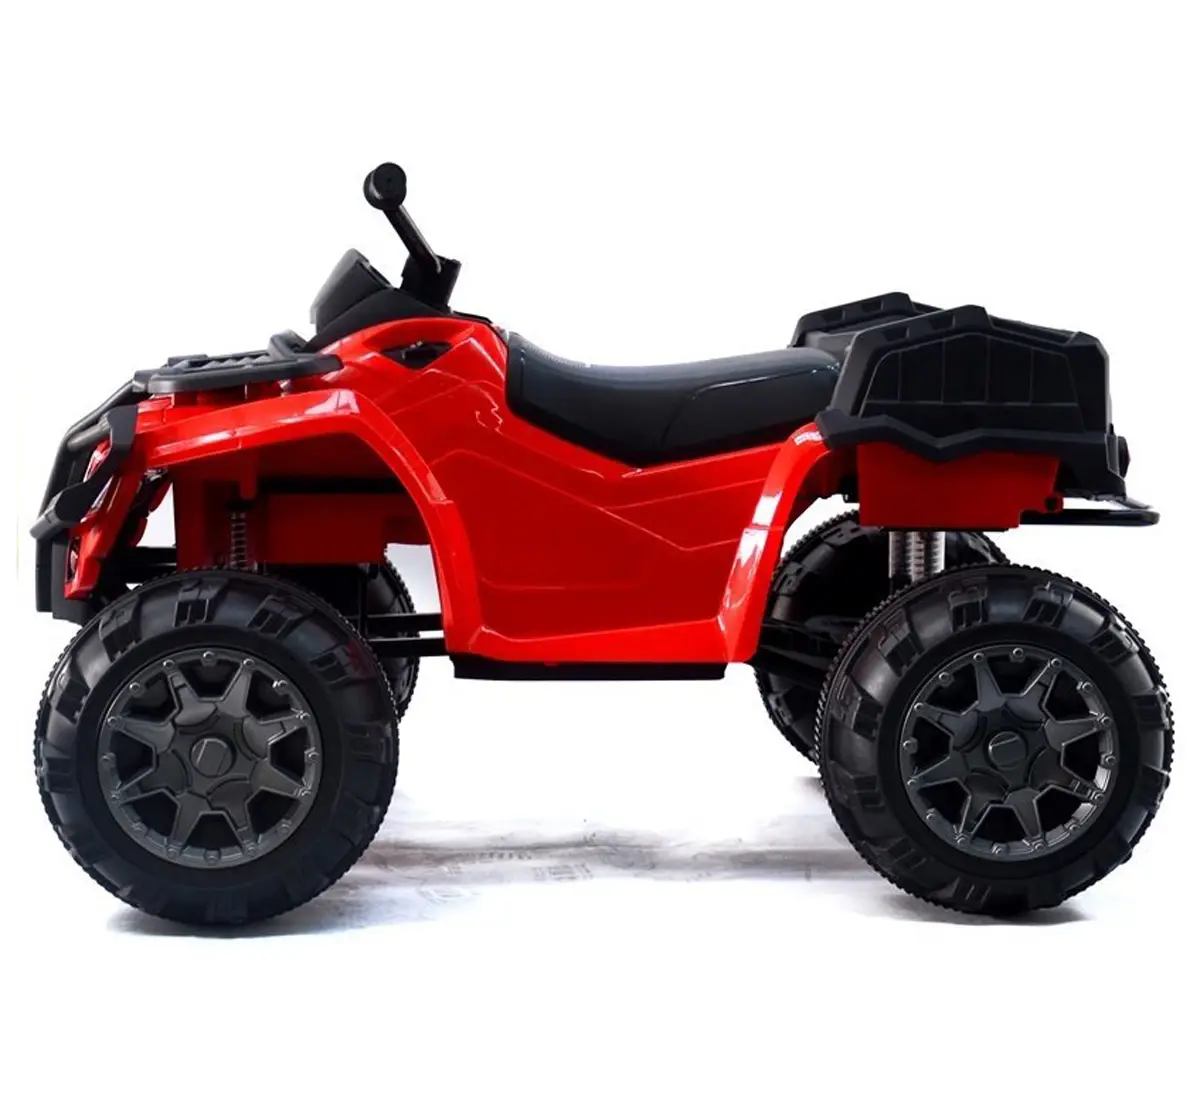 Bettyma ATV RC Buggy 2.5Ghz - Battery Operated Rideons for Kids, 3Y+, Assorted